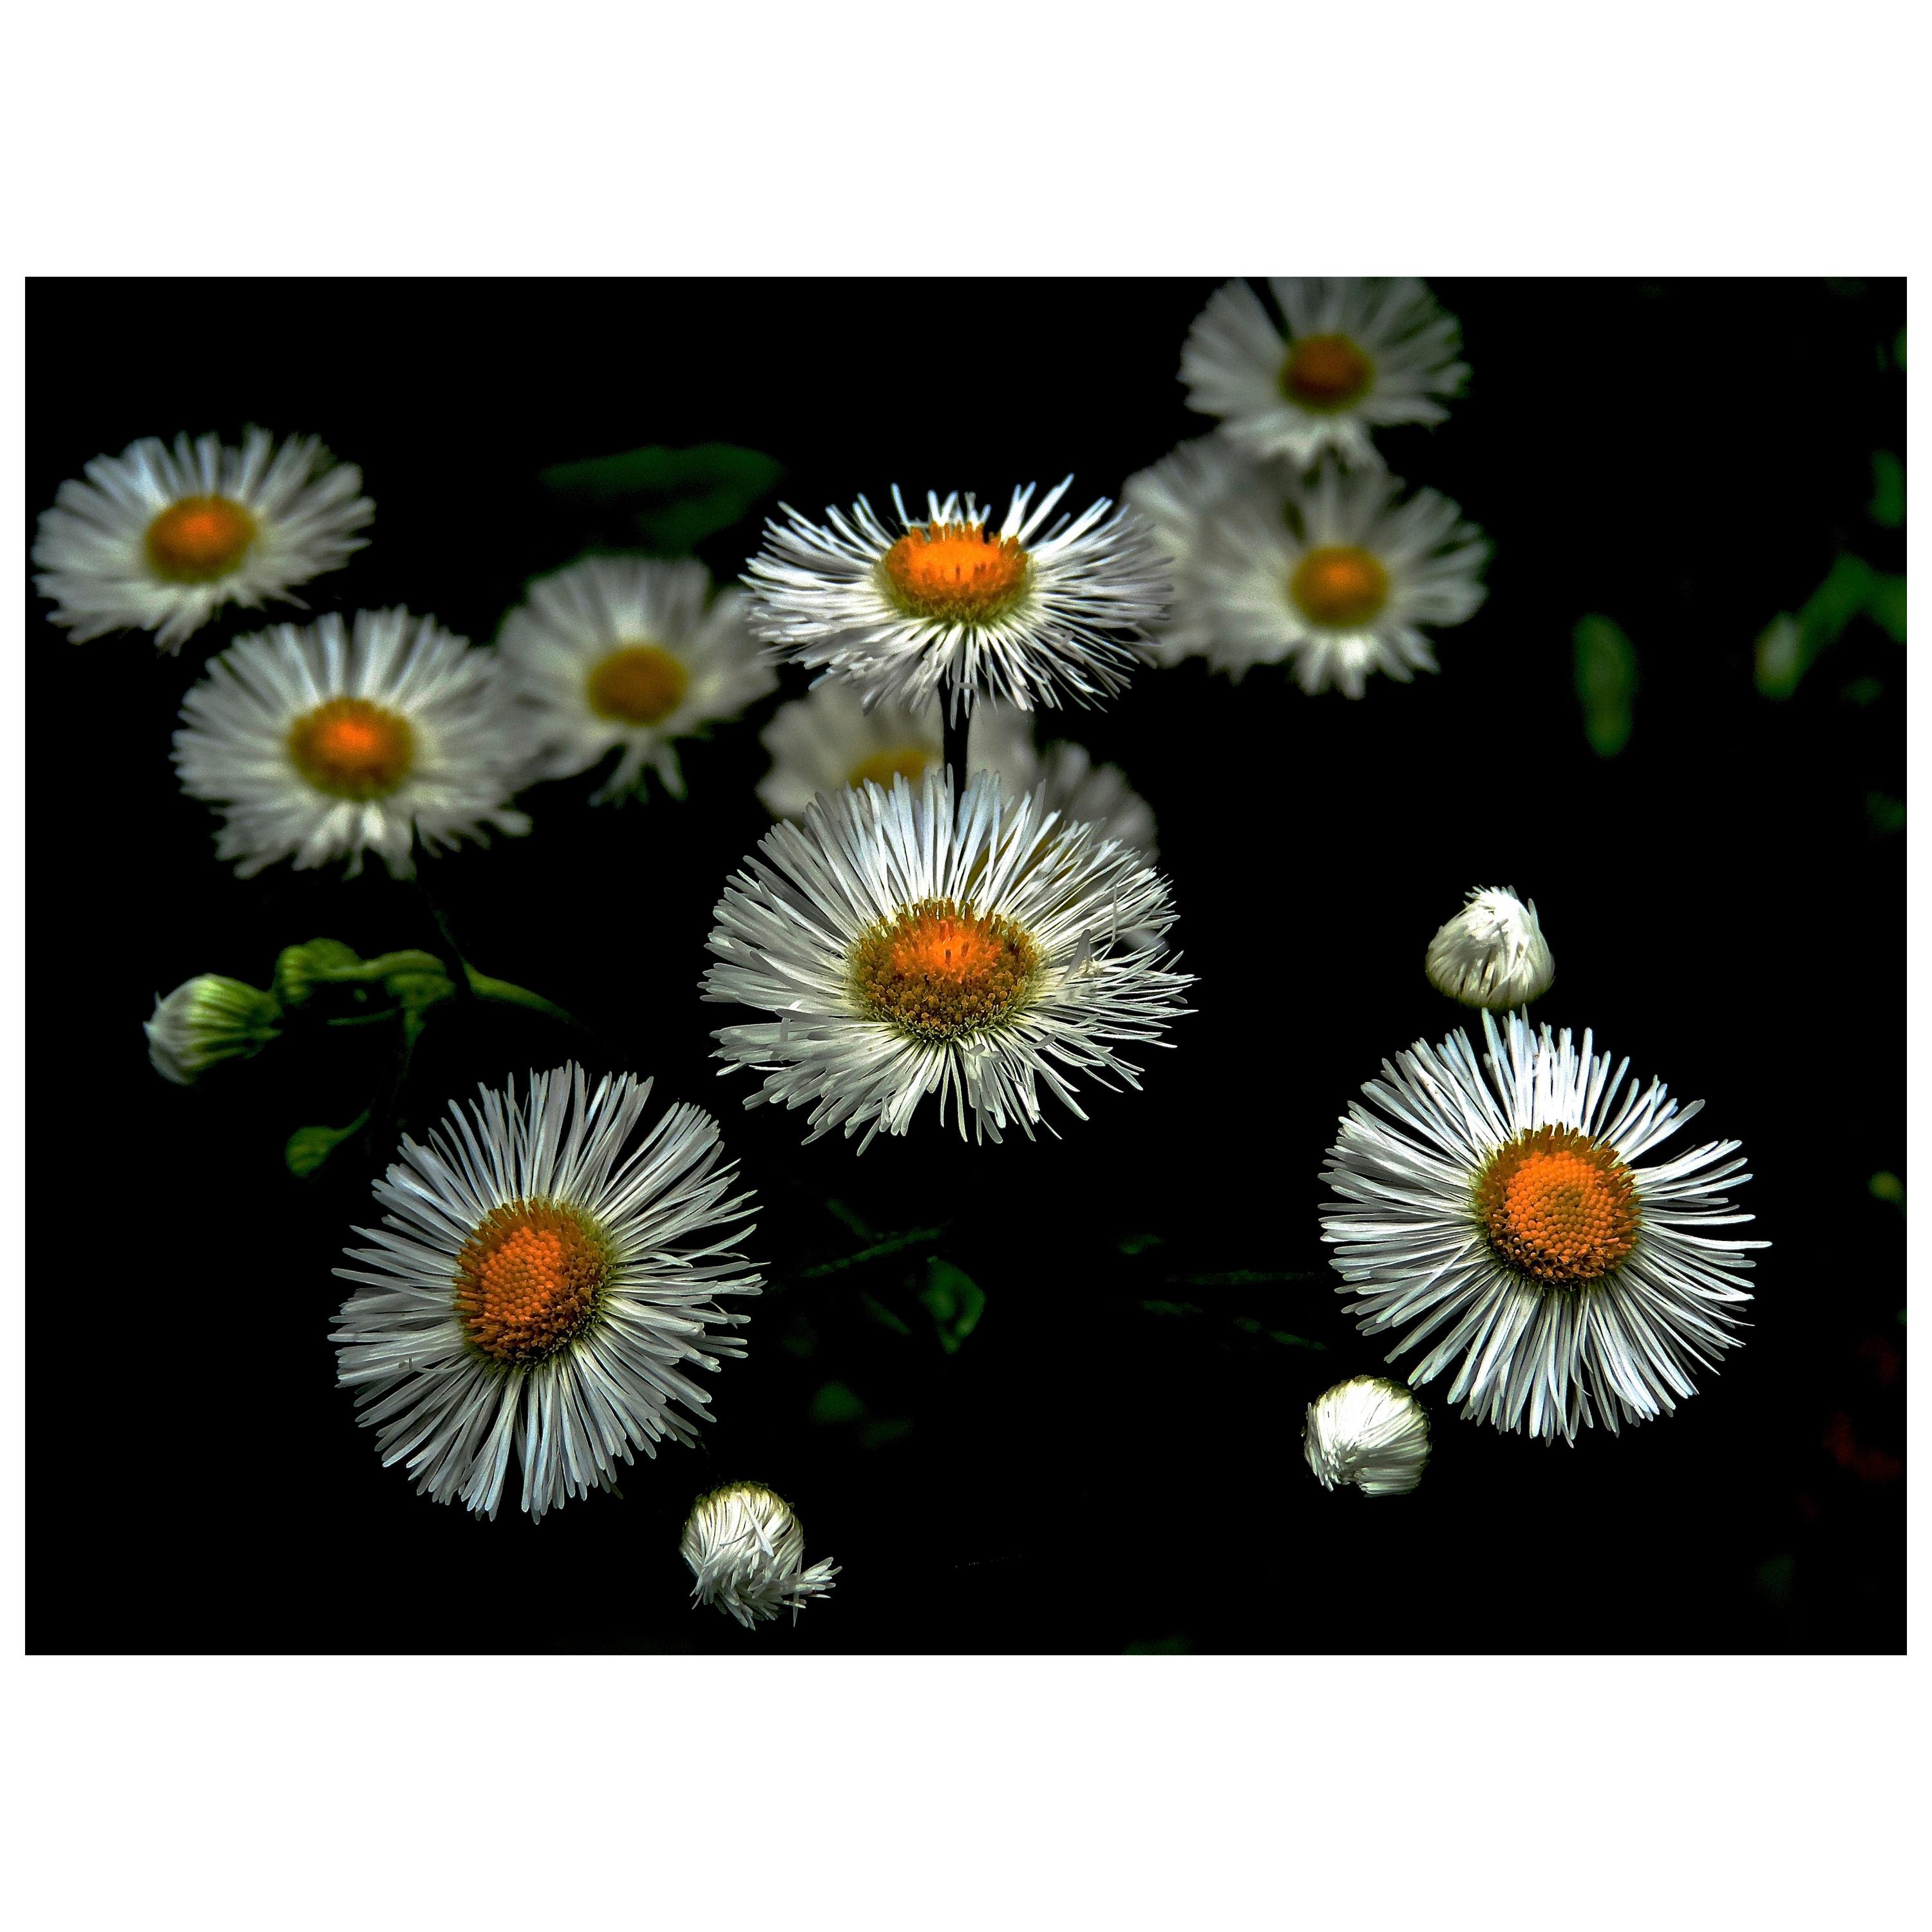 Tiny Daisy Flowers Digital Photographic Print by Dave Lasker For Sale